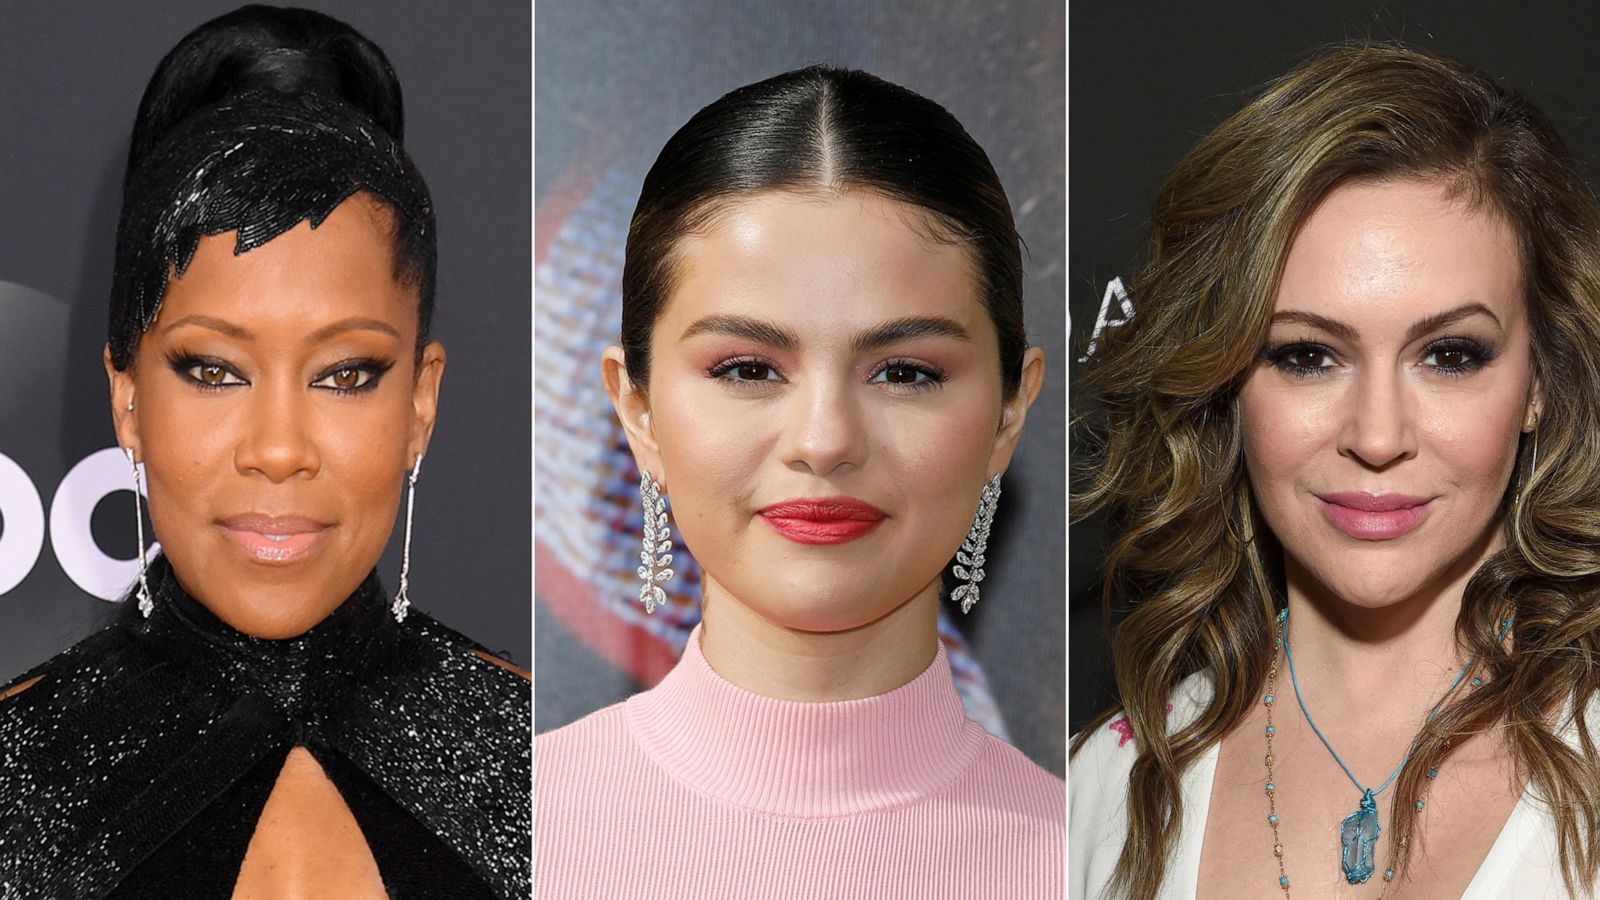 Taylor Swift And Selena Gomez Lesbian - Nearly 500 leaders, activists and celebrities sign open letter supporting  trans women and girls - Good Morning America